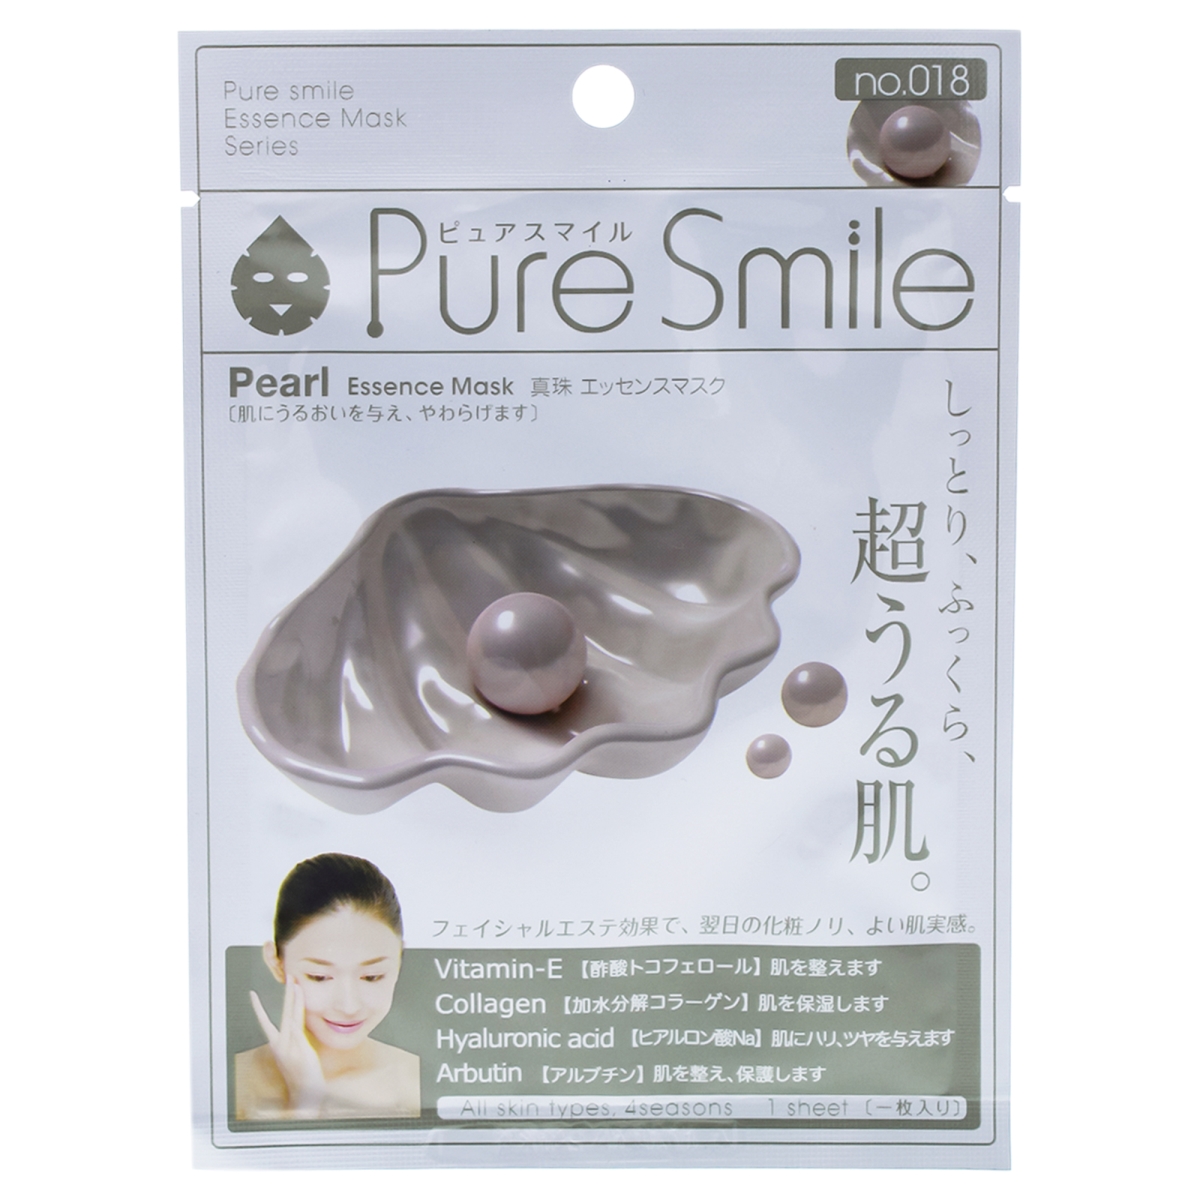 I0088301 Essence Mask For Women - Pearl - 0.8 Oz